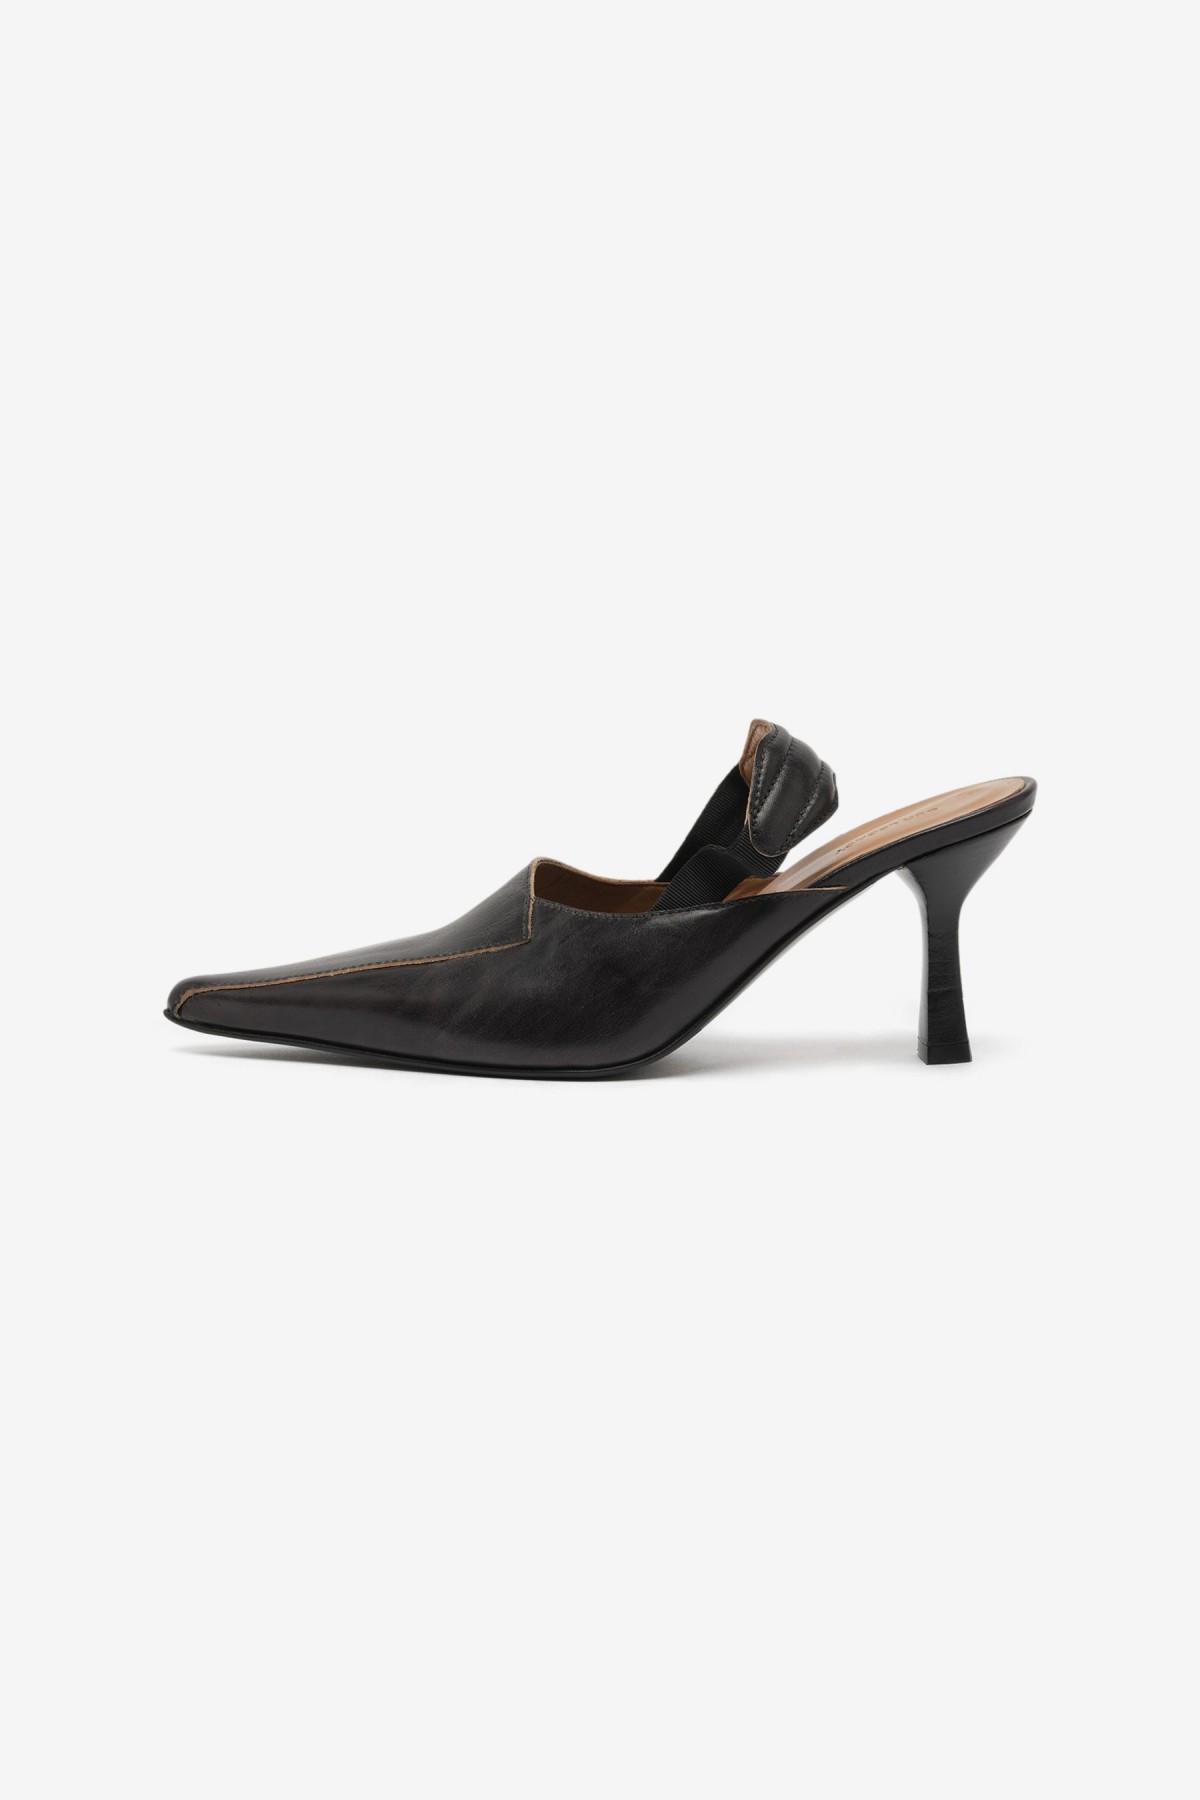 Our Legacy Envelope Heel in Top Dyed Black Leather